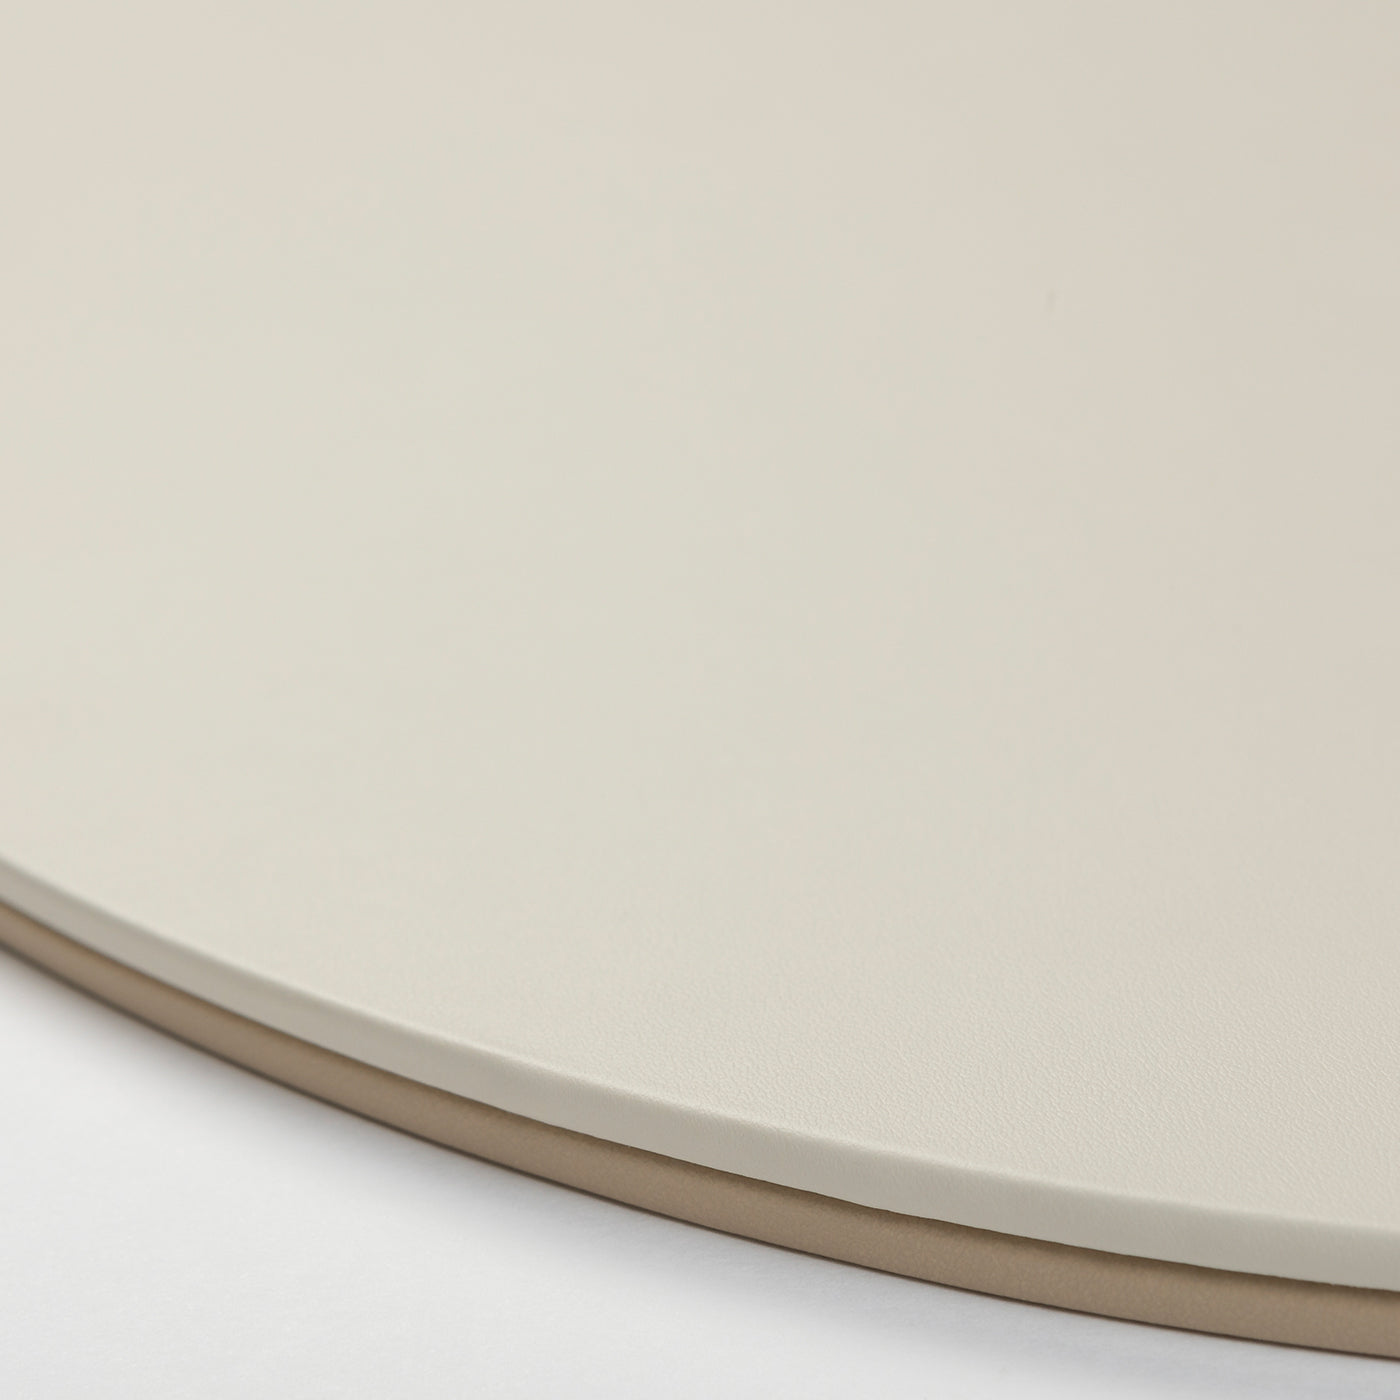 Mondrian Capuccino Beige and Luna White Oval Placemat - Alternative view 5